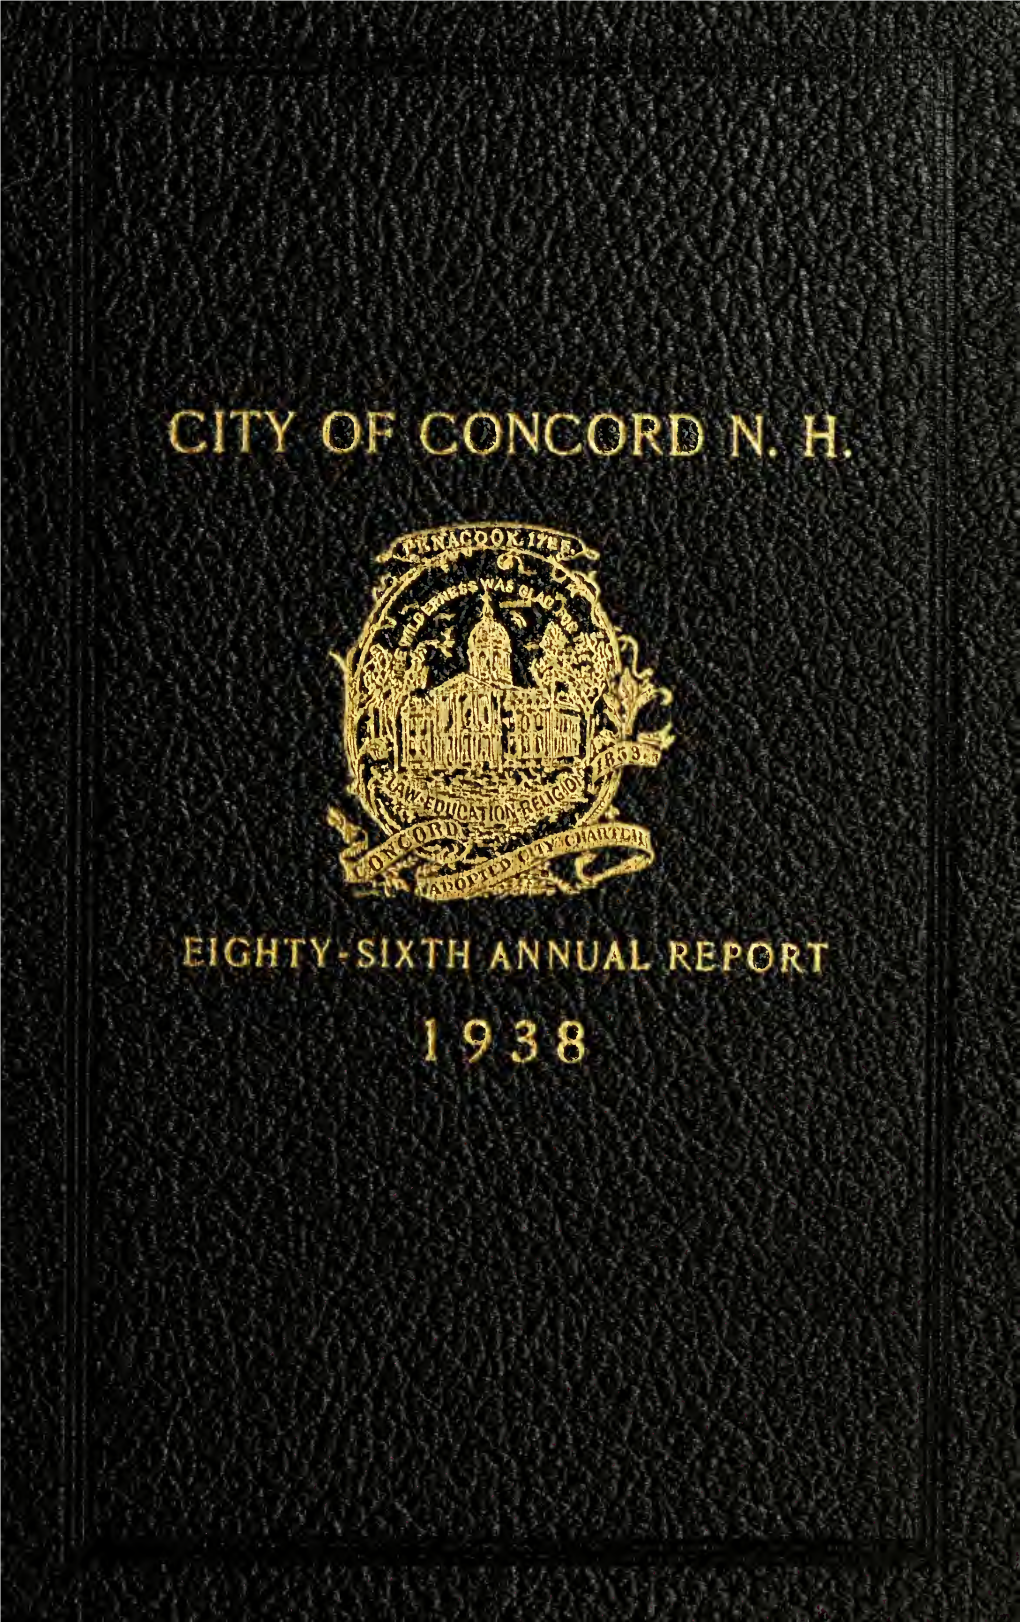 City of Concord. Eighty-Sixth Annual Report of the Receipts And